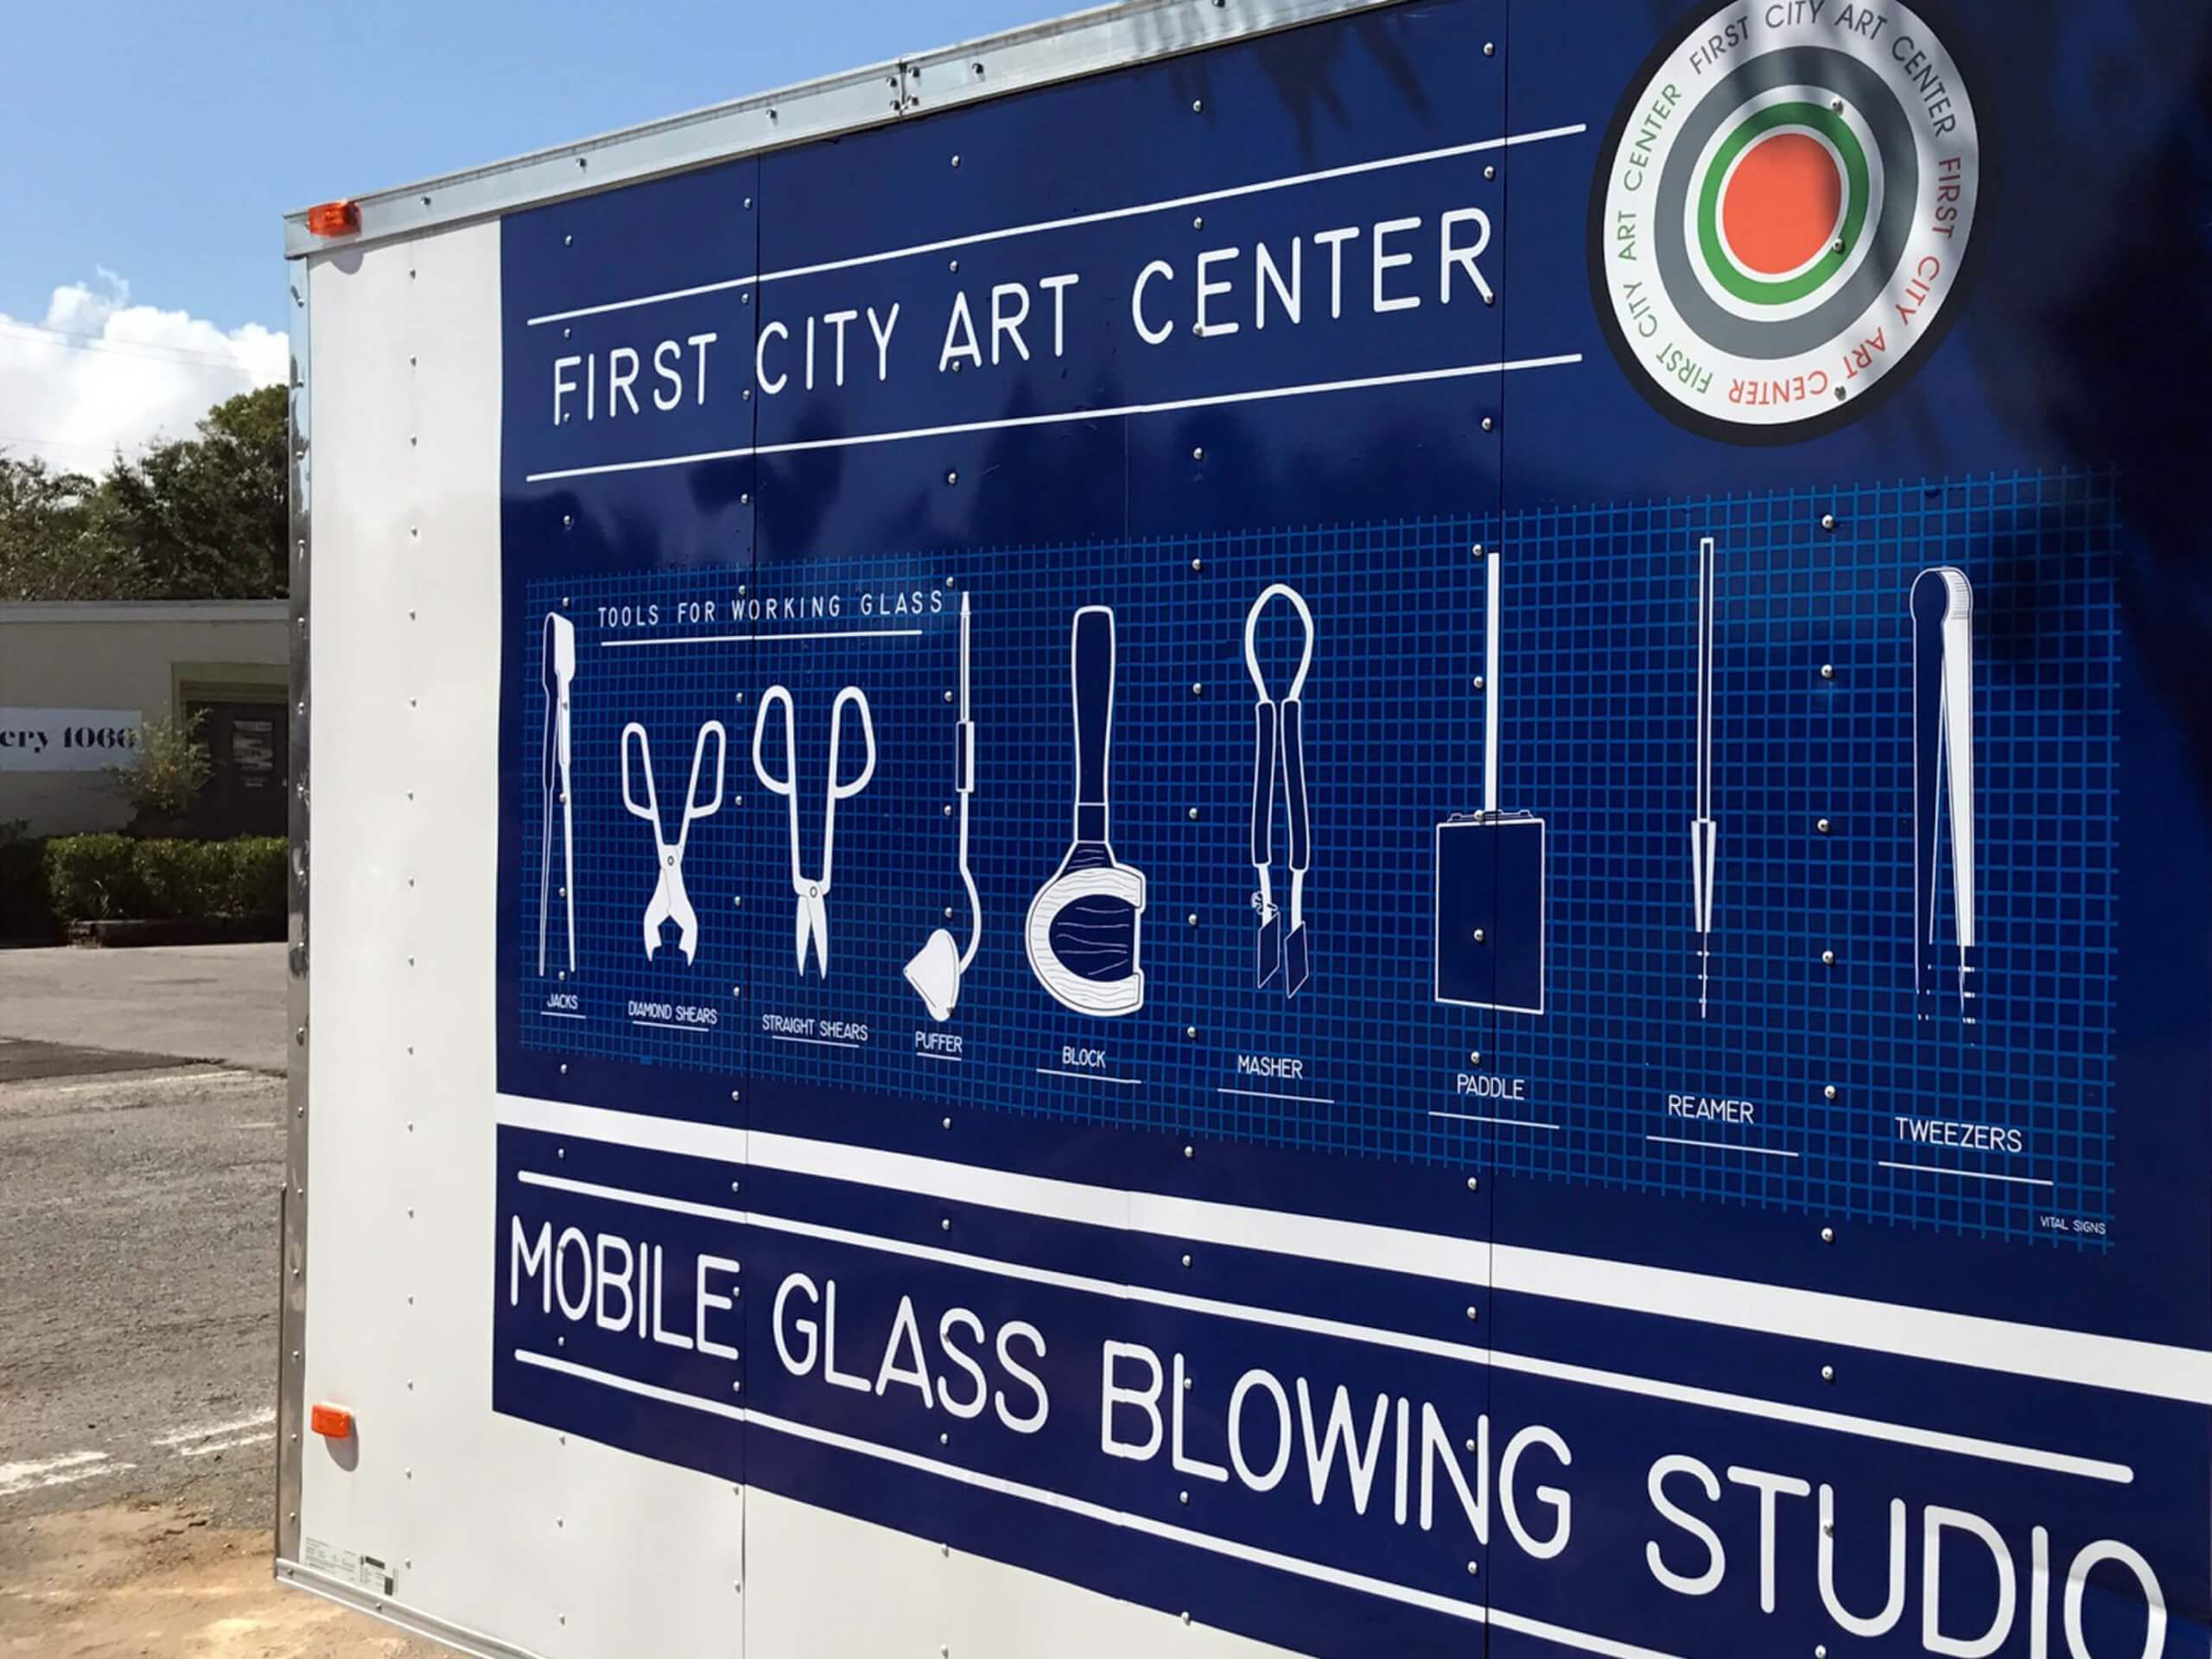 First City Art Center's Mobile Glassblowing Studio